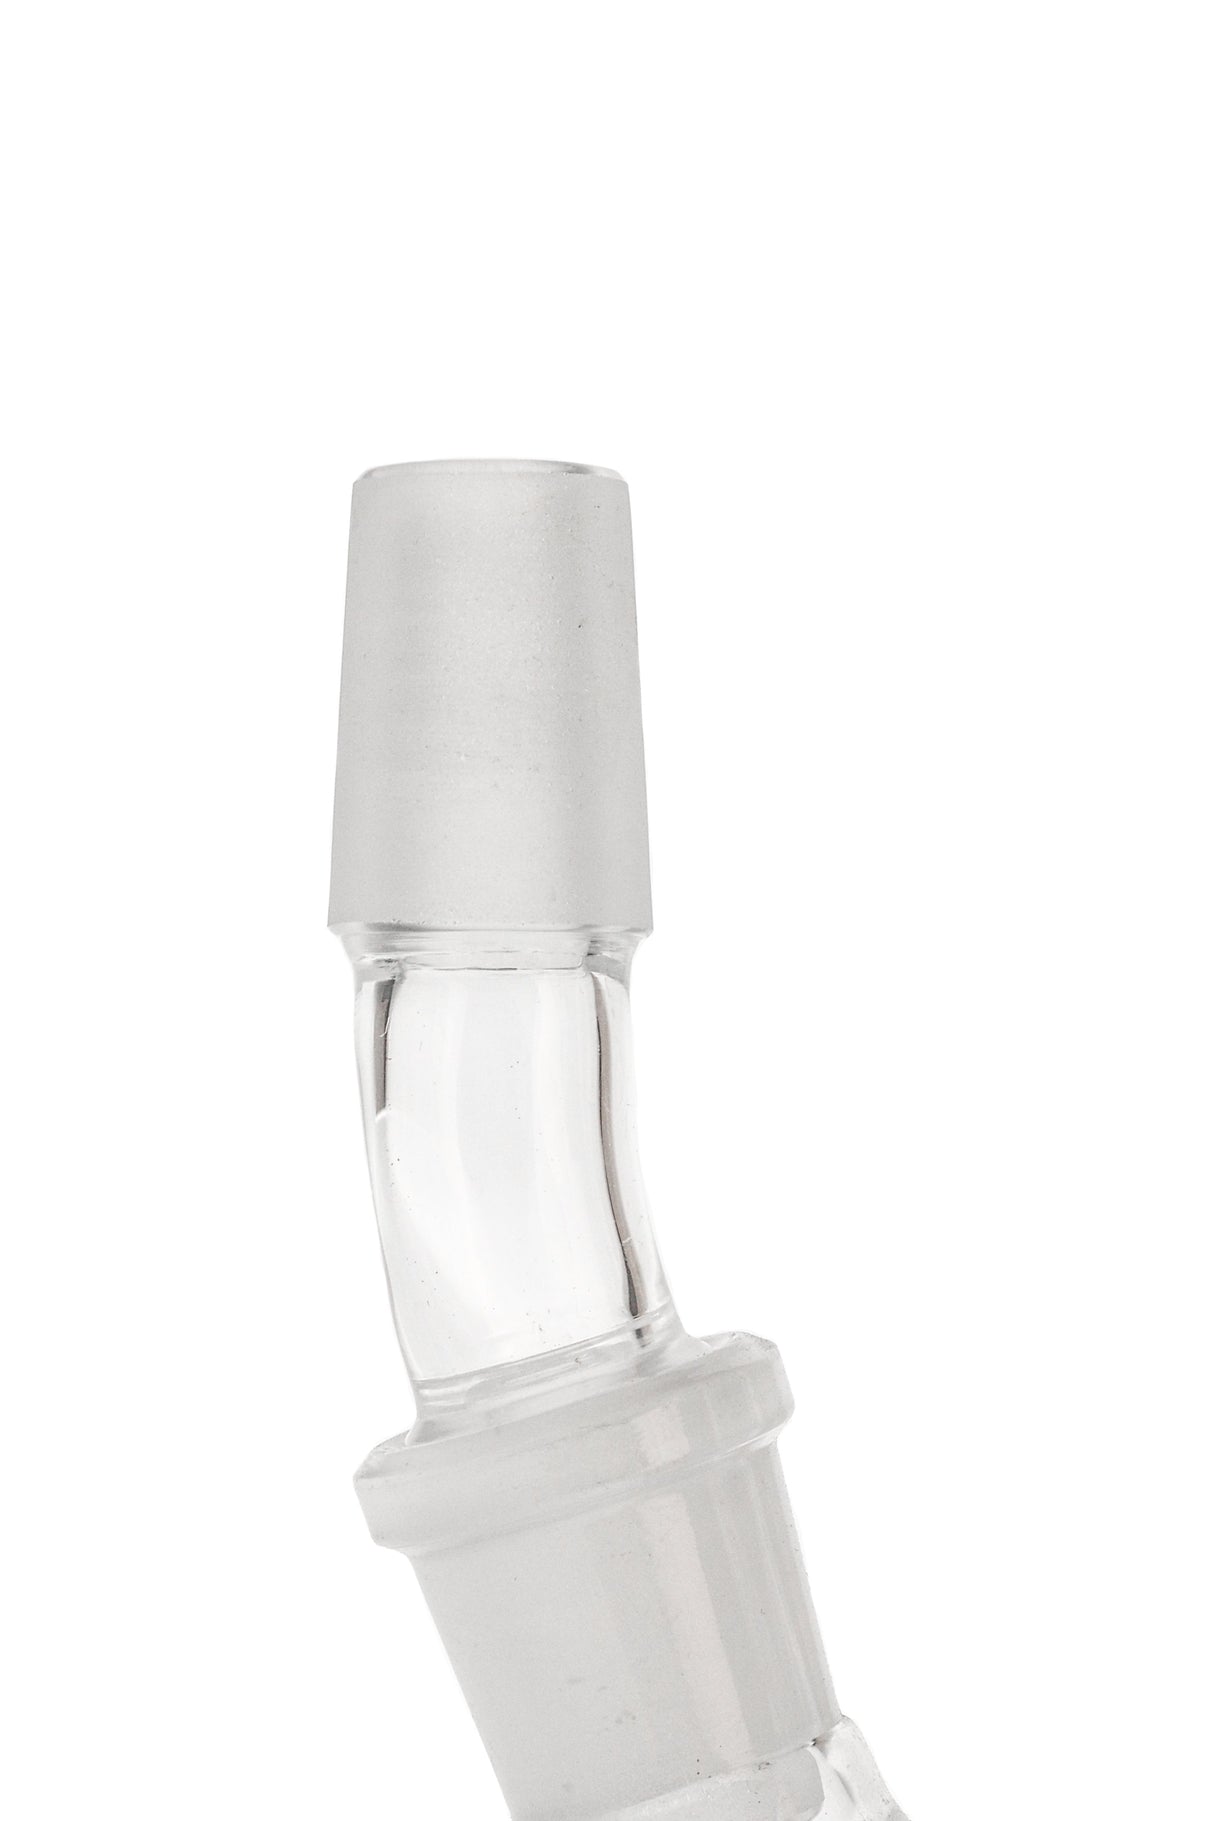 TAG - Quartz Angle Adapter for Bongs - Close-up Side View on White Background